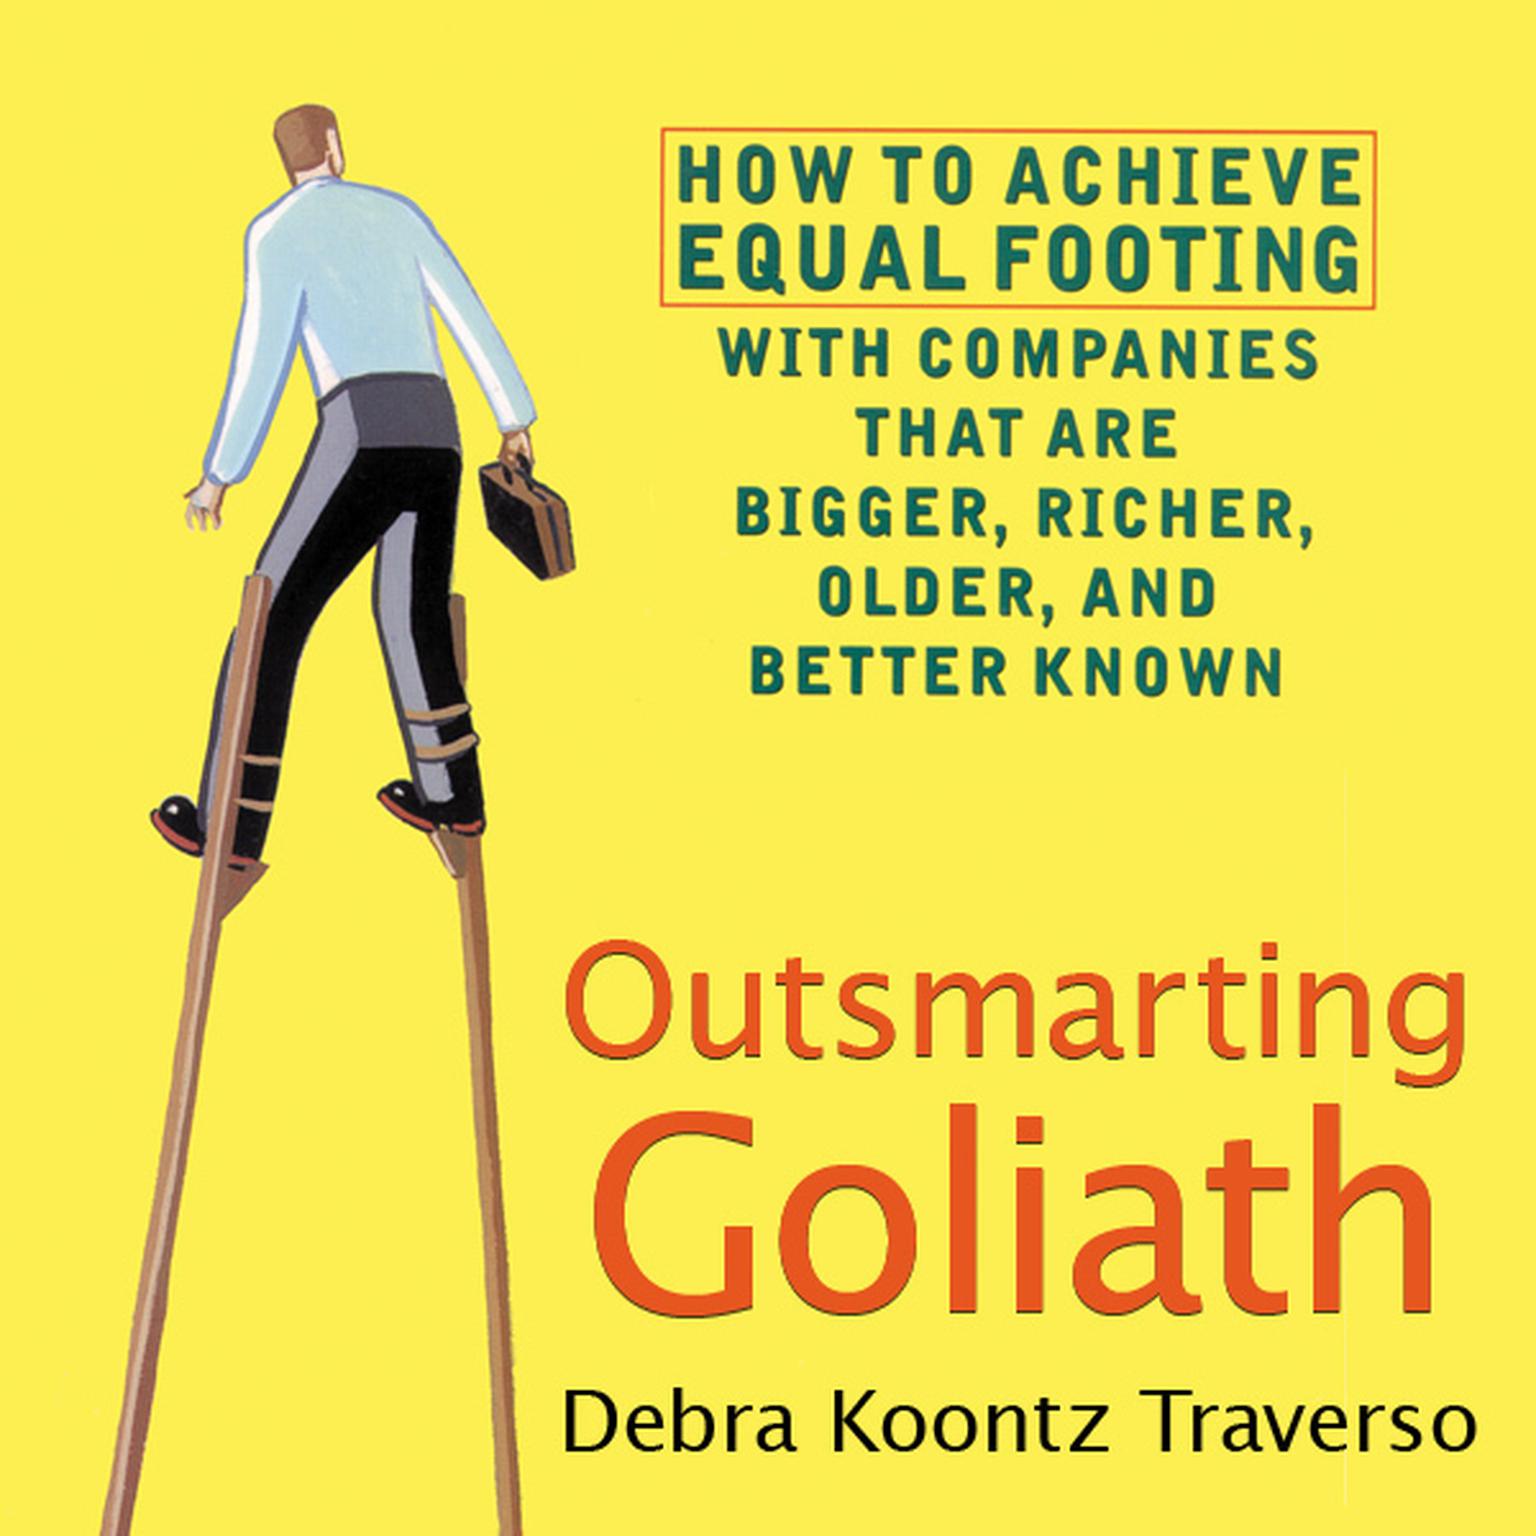 Outsmarting Goliath: How to Achieve Equal Footing with Companies that are Bigger, Richer, Older, and Better Known Audiobook, by Debra Koontz Traverso